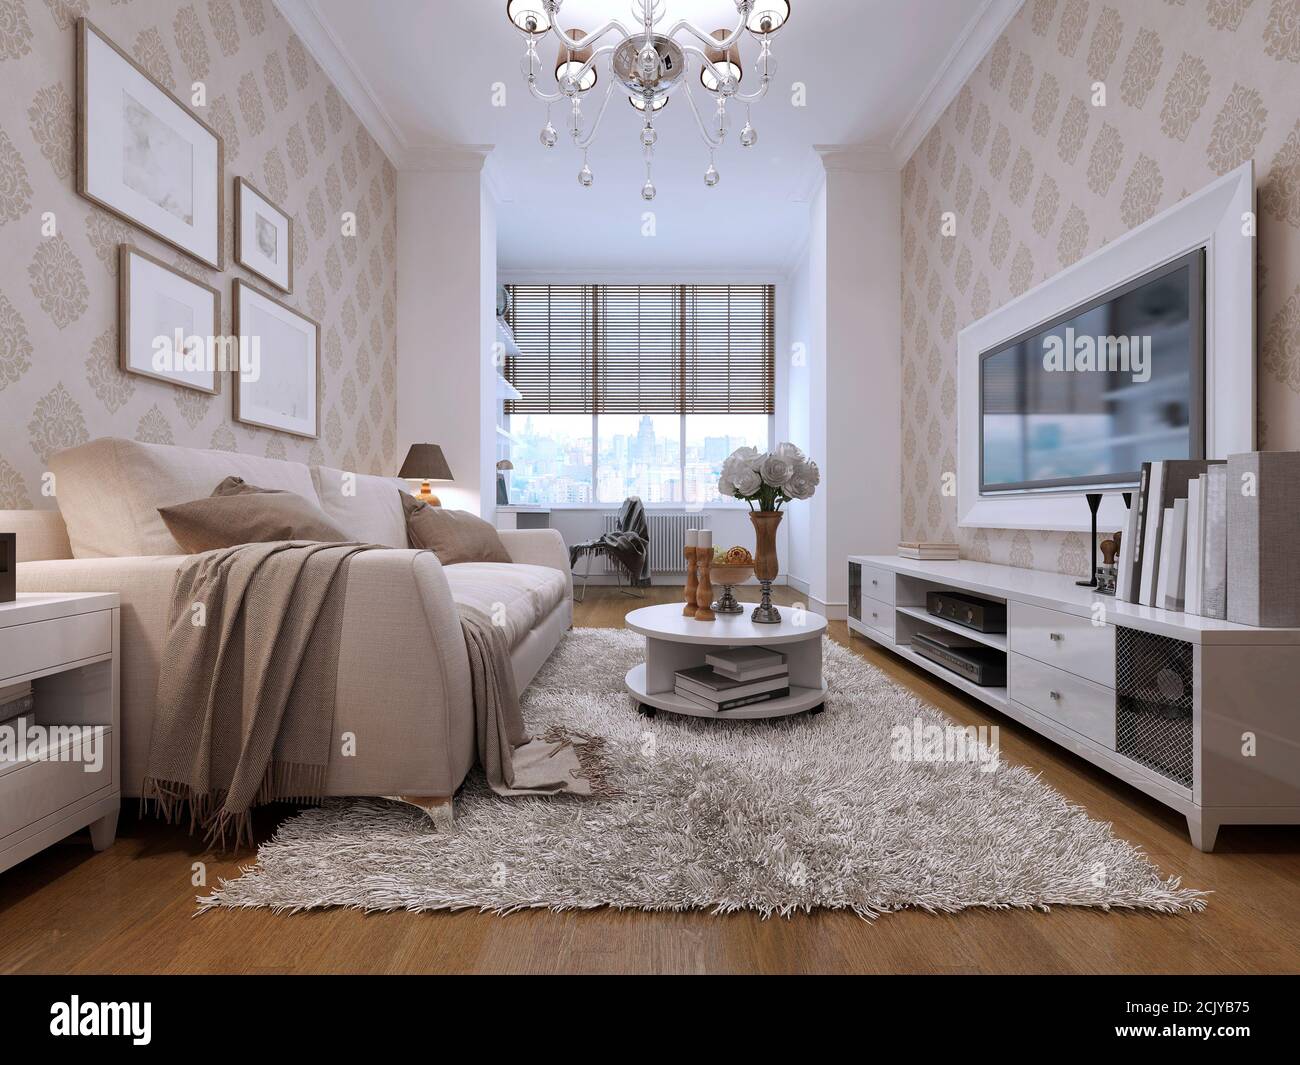 Guest rooms in Art Deco style. With media system with TV in a white frame. And a large window. 3Drender. Stock Photo